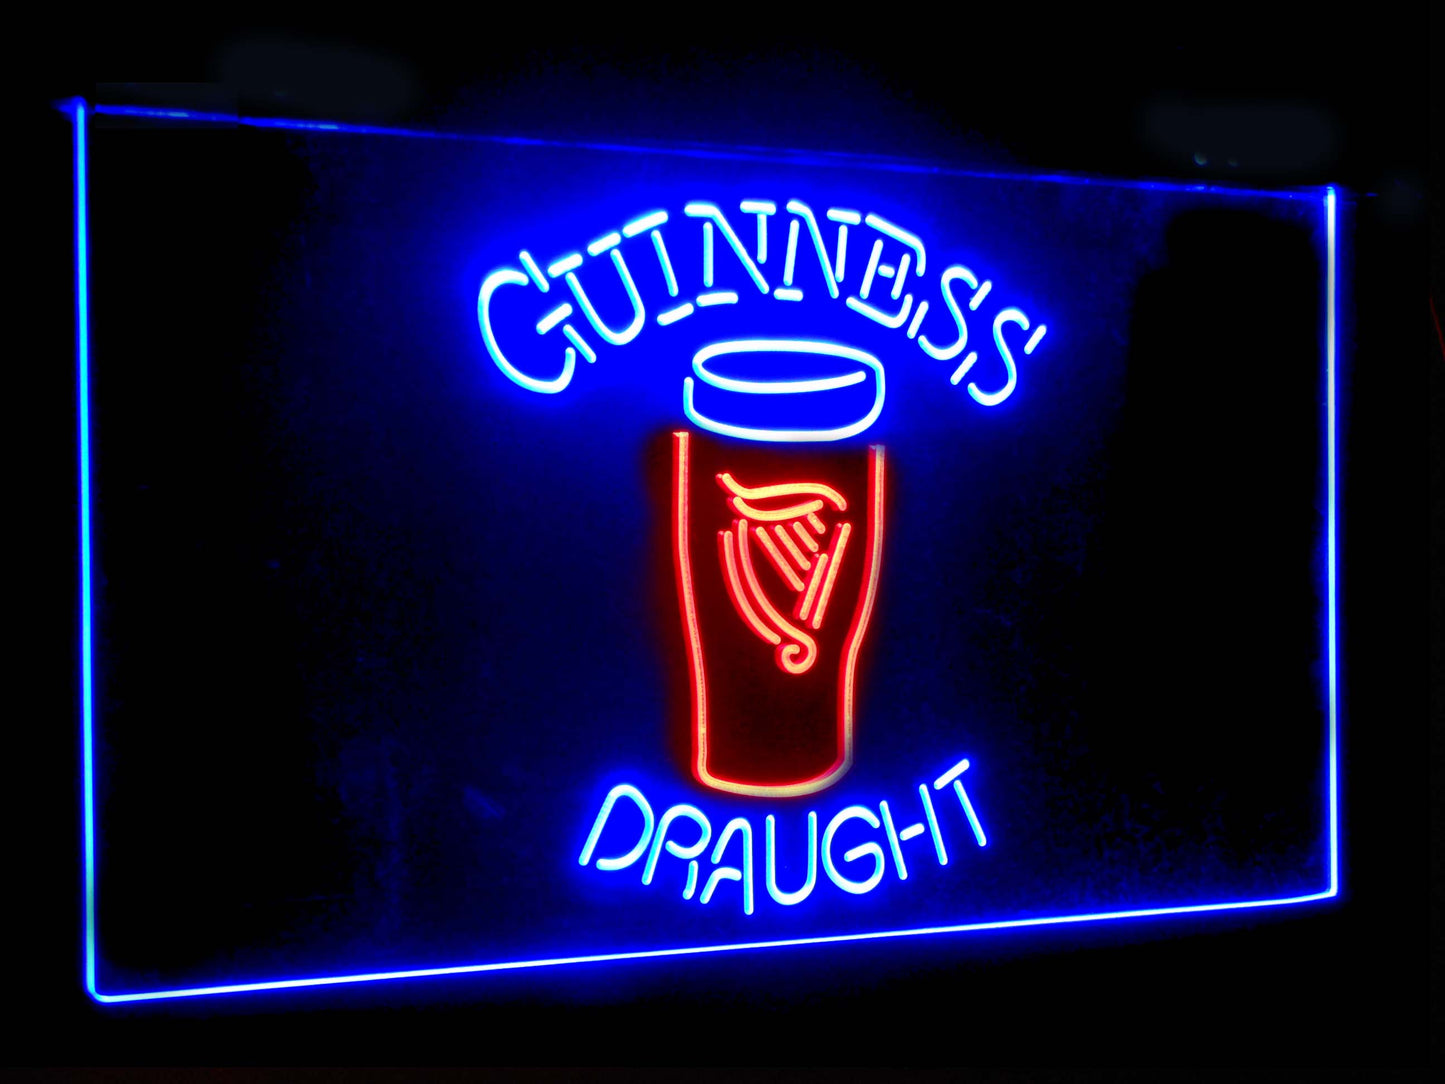 Guinness Draught Ale  Bar Decoration Gift Dual Color Led Neon Light Signs st6-a2044 by Woody Signs Co. - Handmade Crafted Unique Wooden Creative